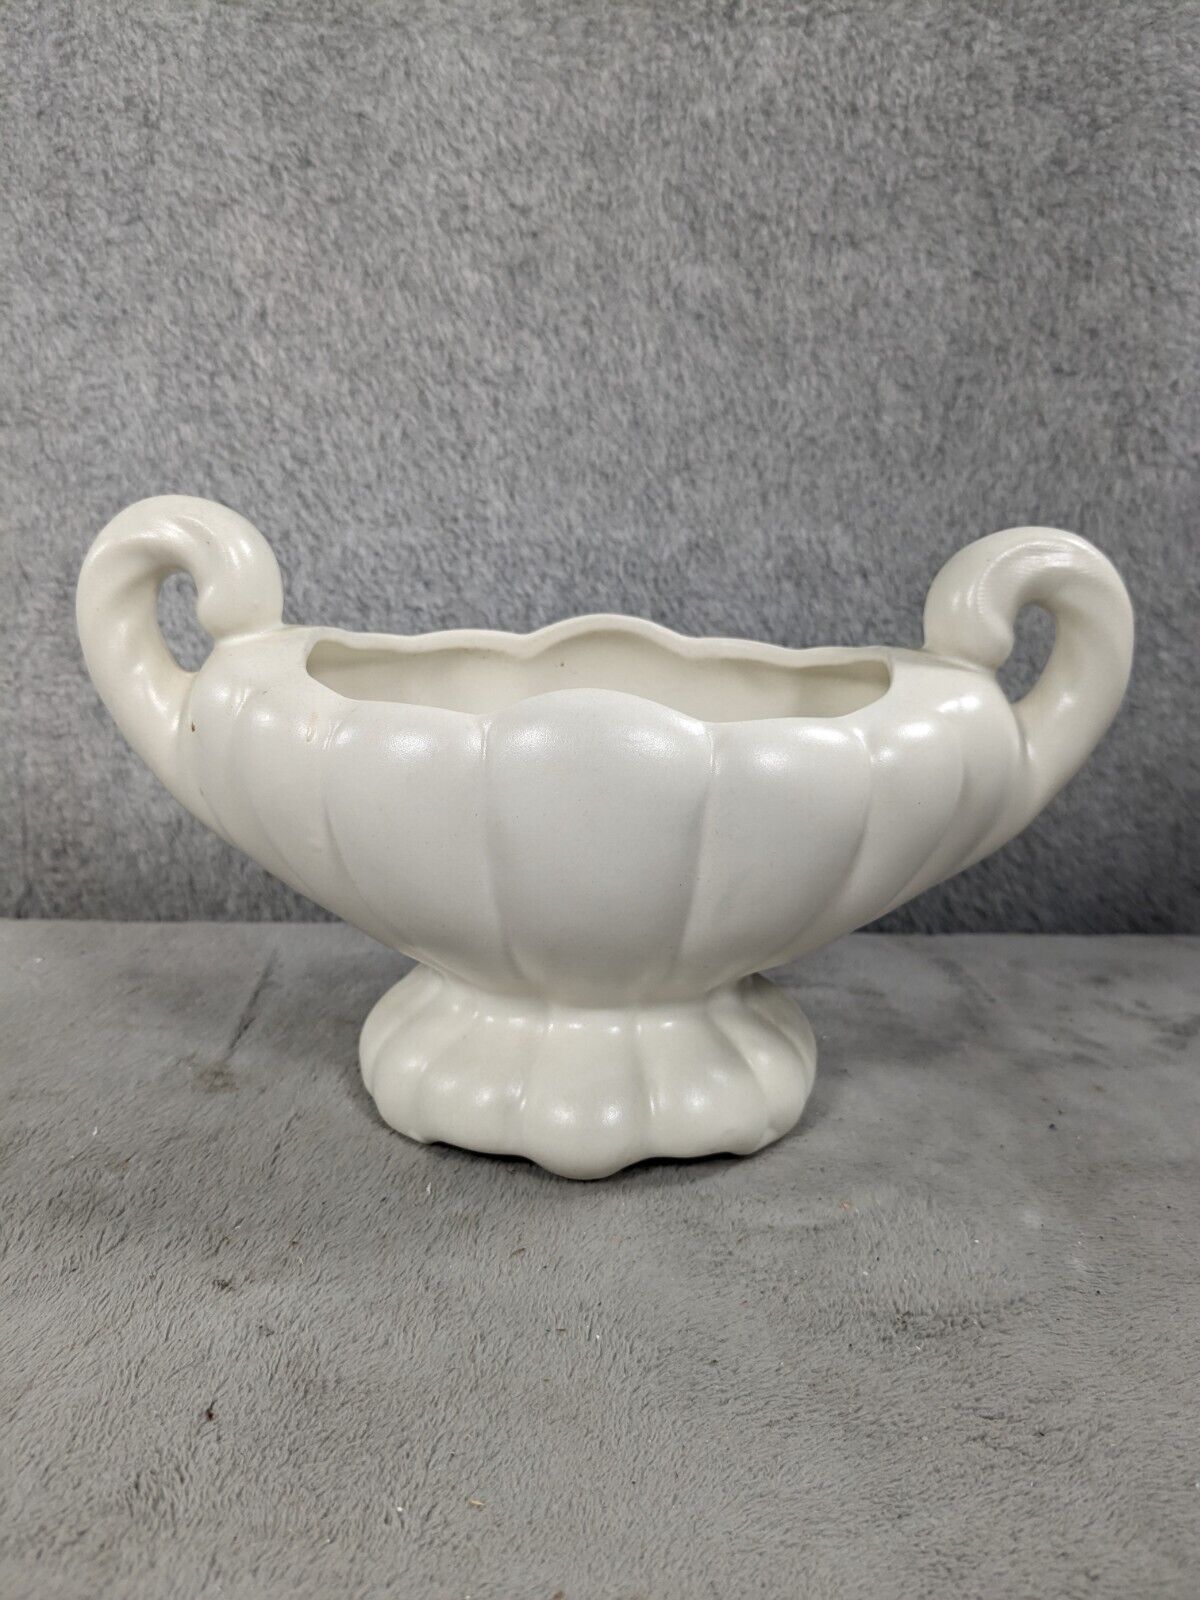 Vintage American Bisque White Planter Pot Curl Handles Rounded Ribs